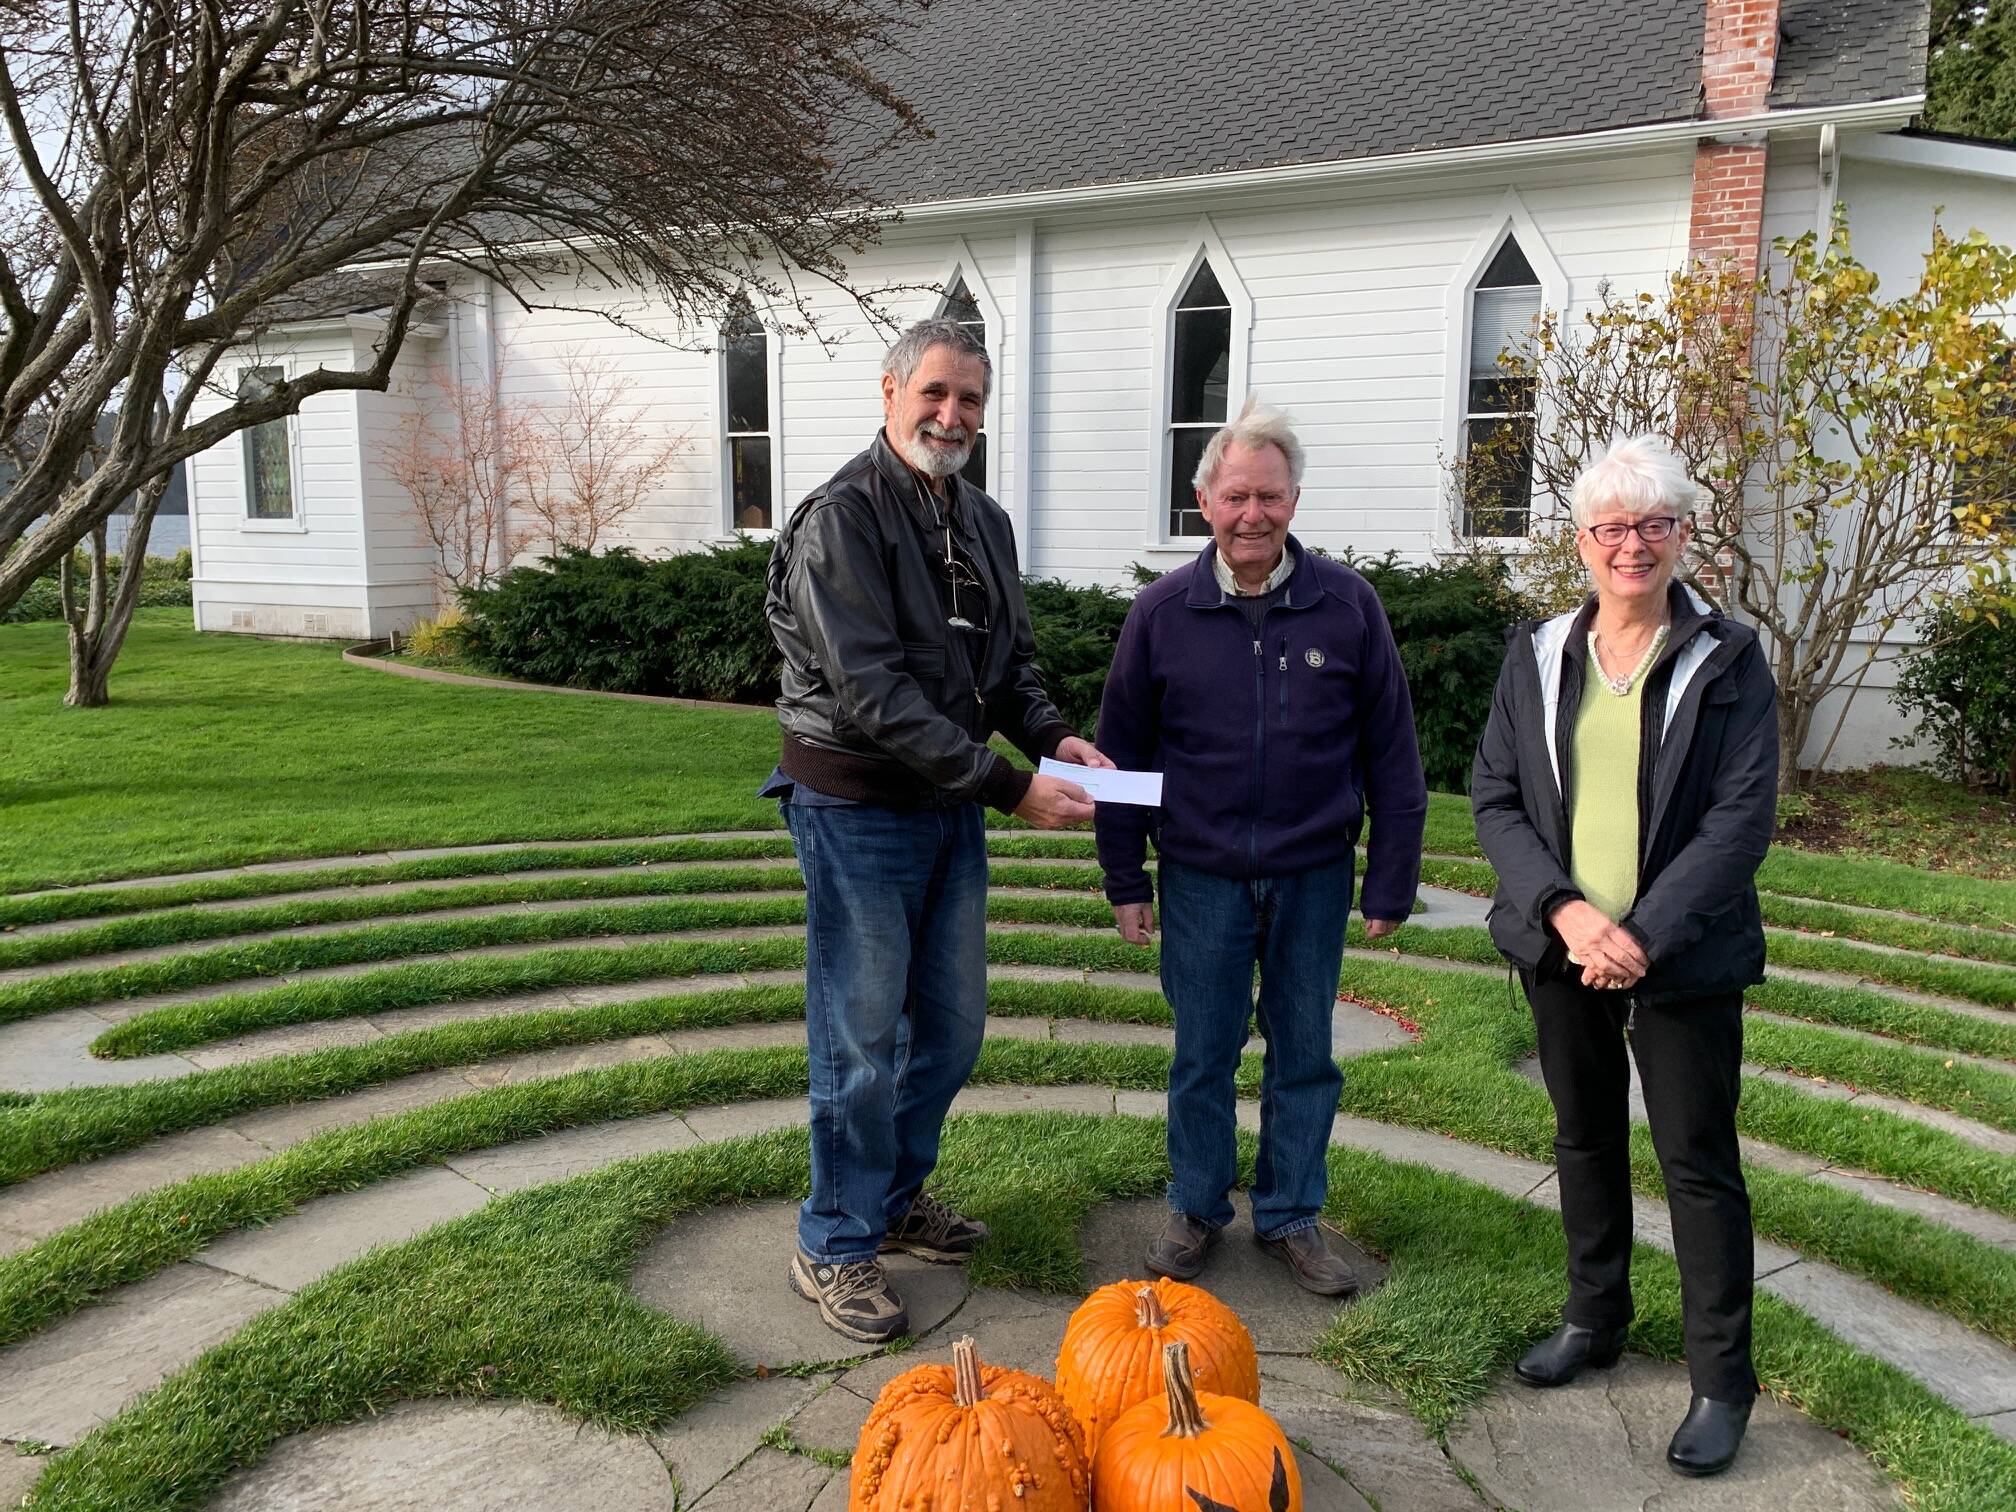 Photo by Diane Craig
L-R: Orcas Aviation’s Treasurer, Jack Decker, and Flight Coordinator Gil Blinn rand their donation from Joanne Cundy of Emmanuel Episcopal’s St. Agnes Guild. The donation will help support the organizations’ Mercy Flight program.